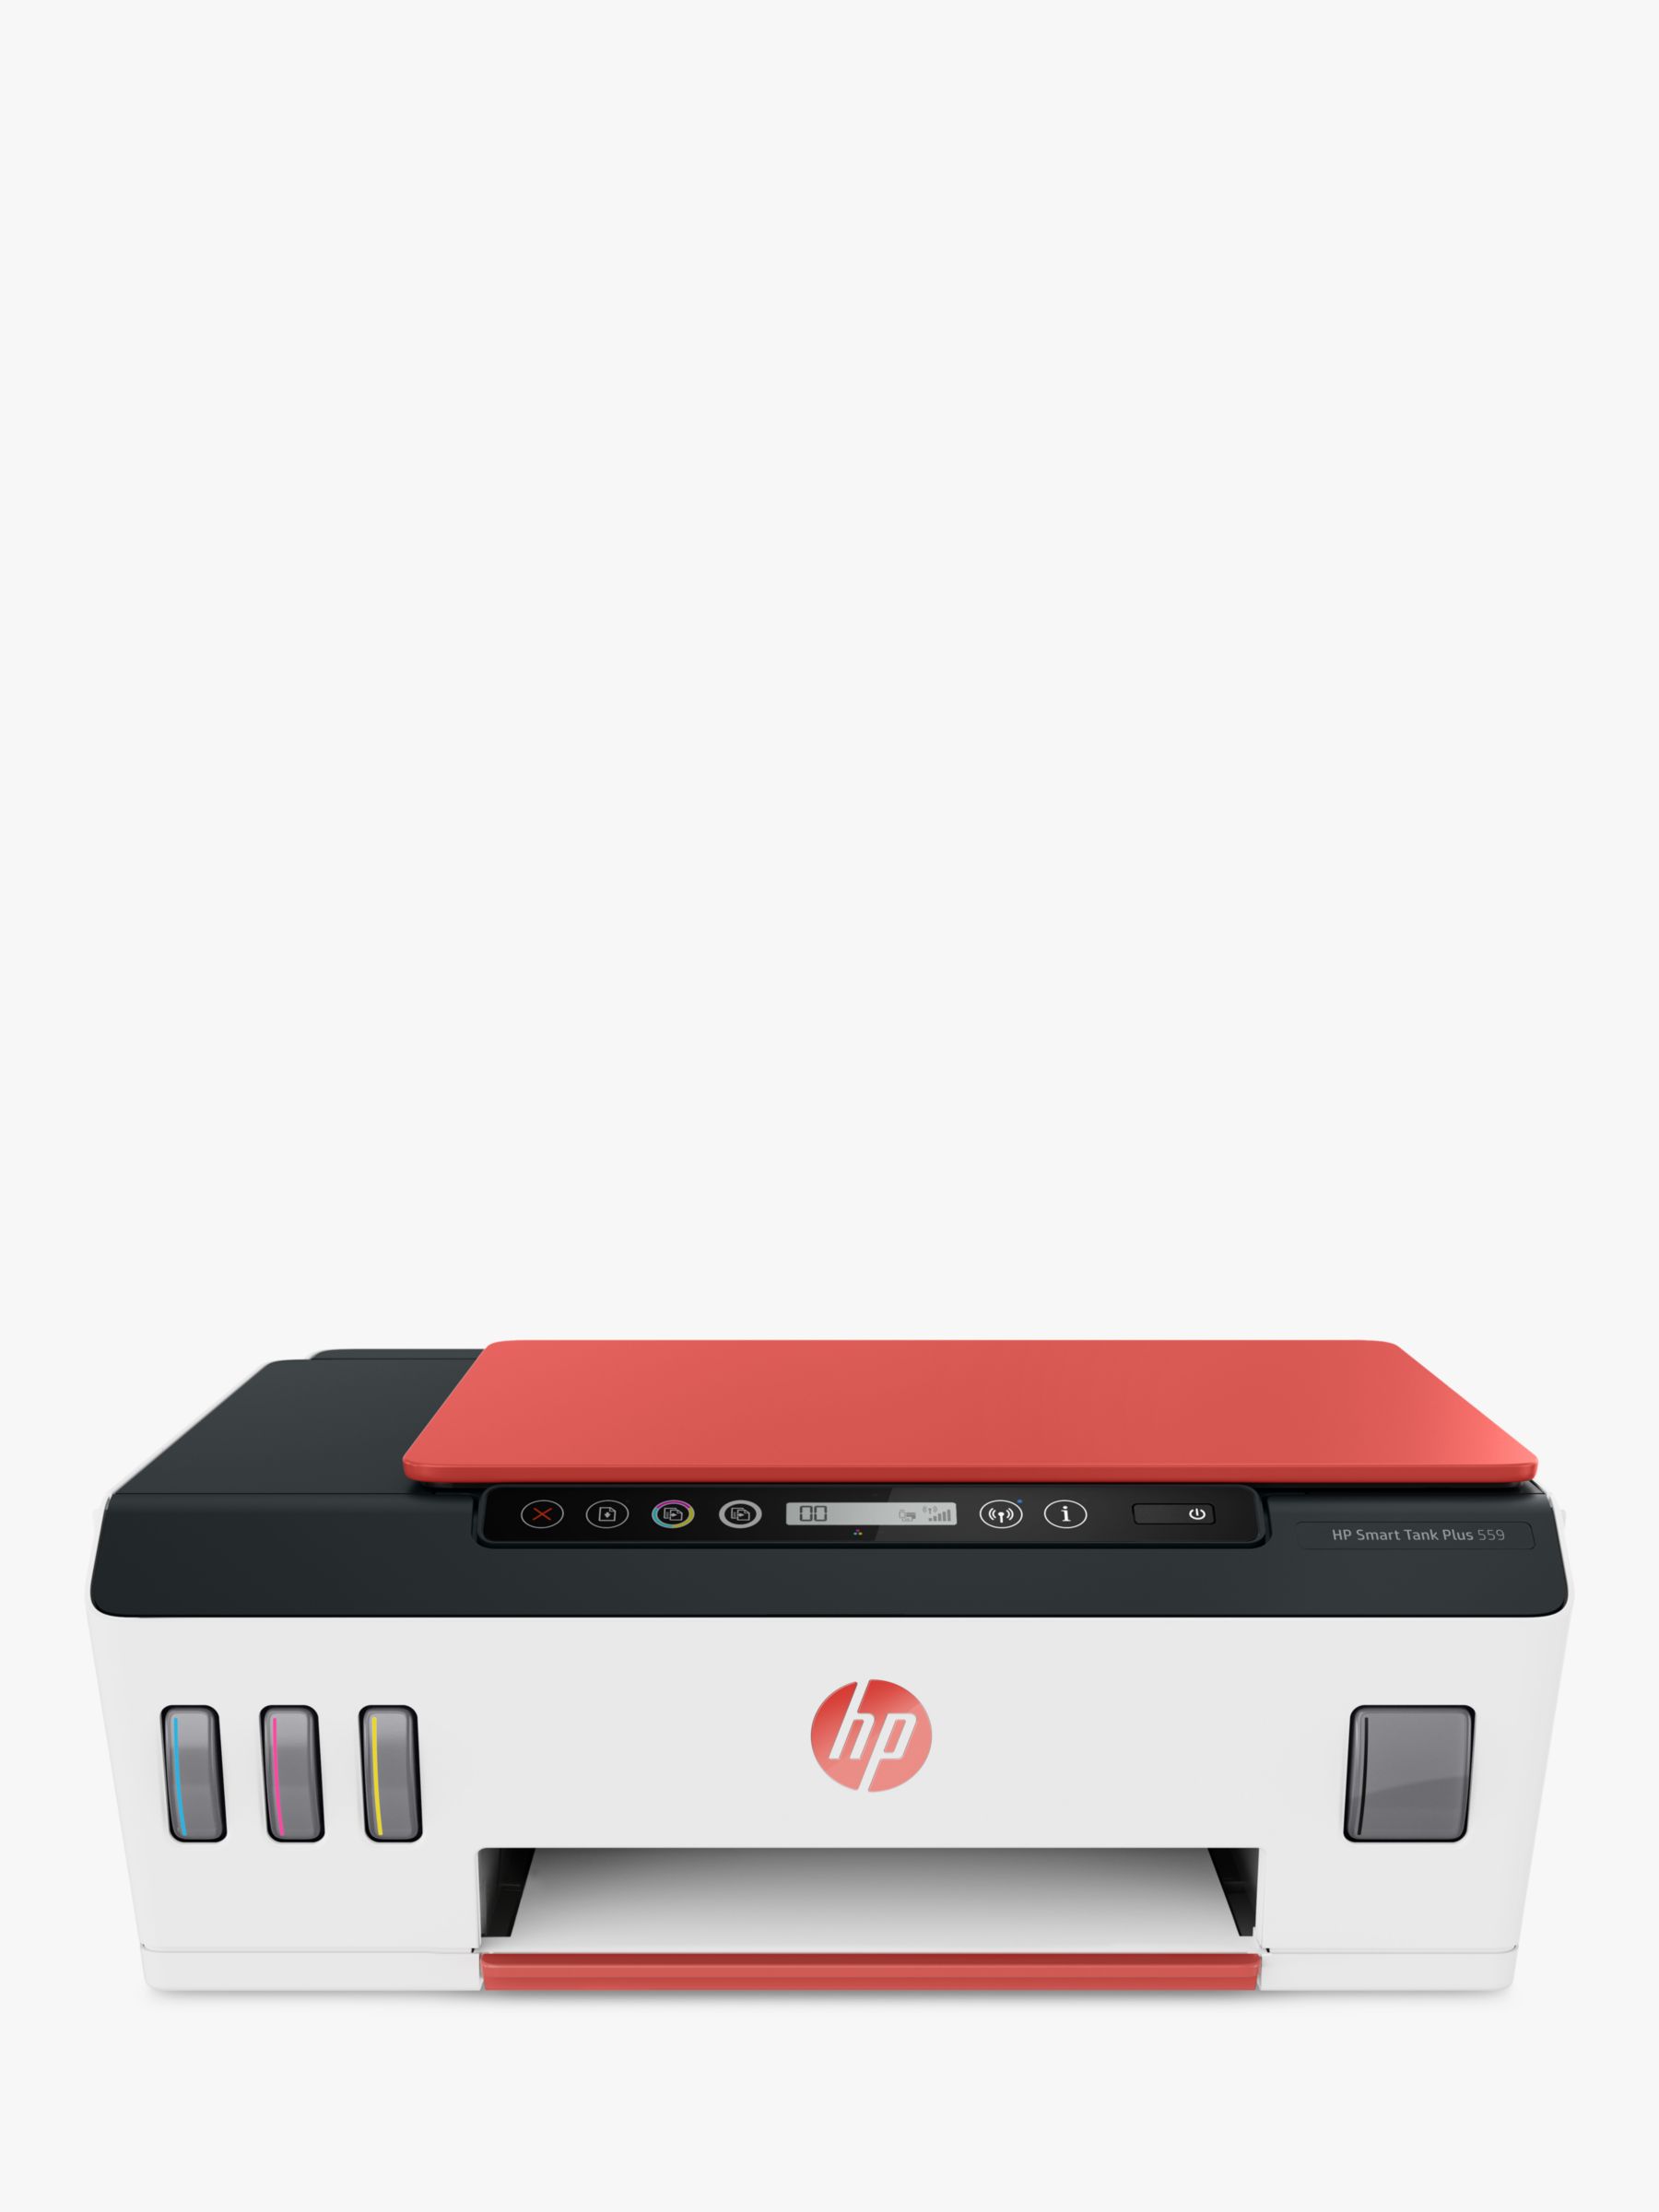 HP Smart Tank Printer, Plus Red/Black/White Wireless 559 All-in-One